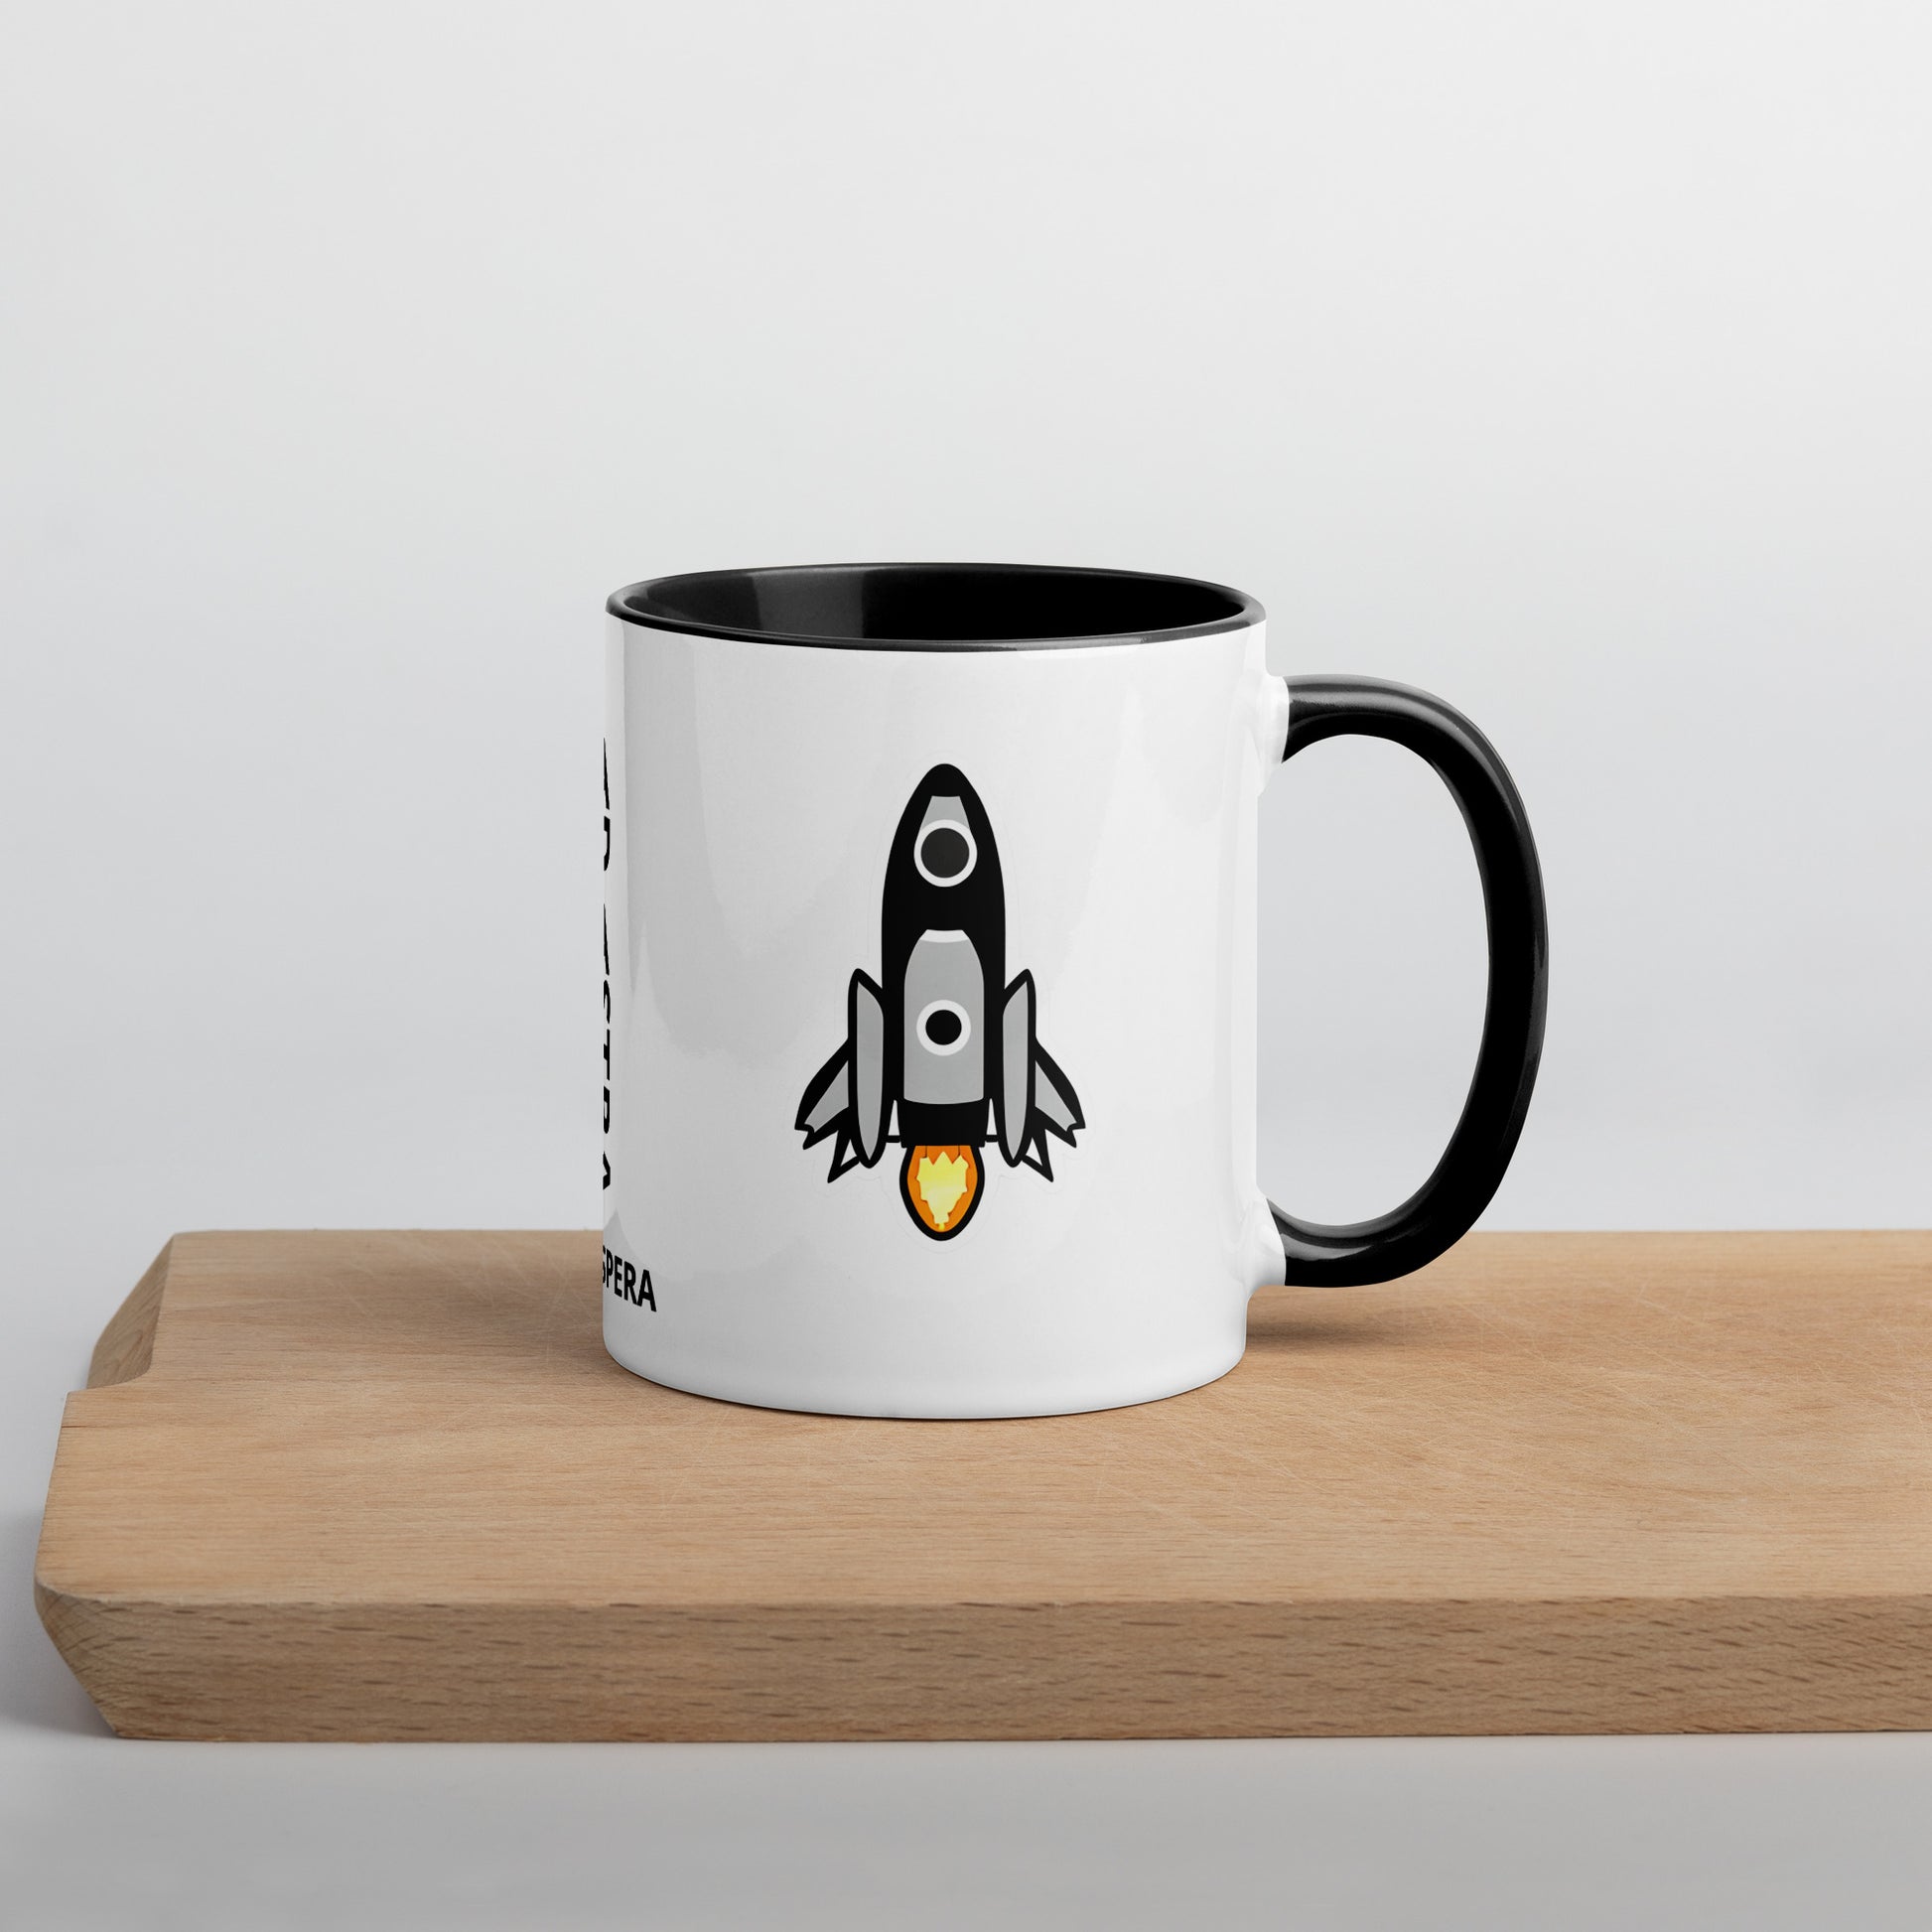 side view of mug showing another rocketship